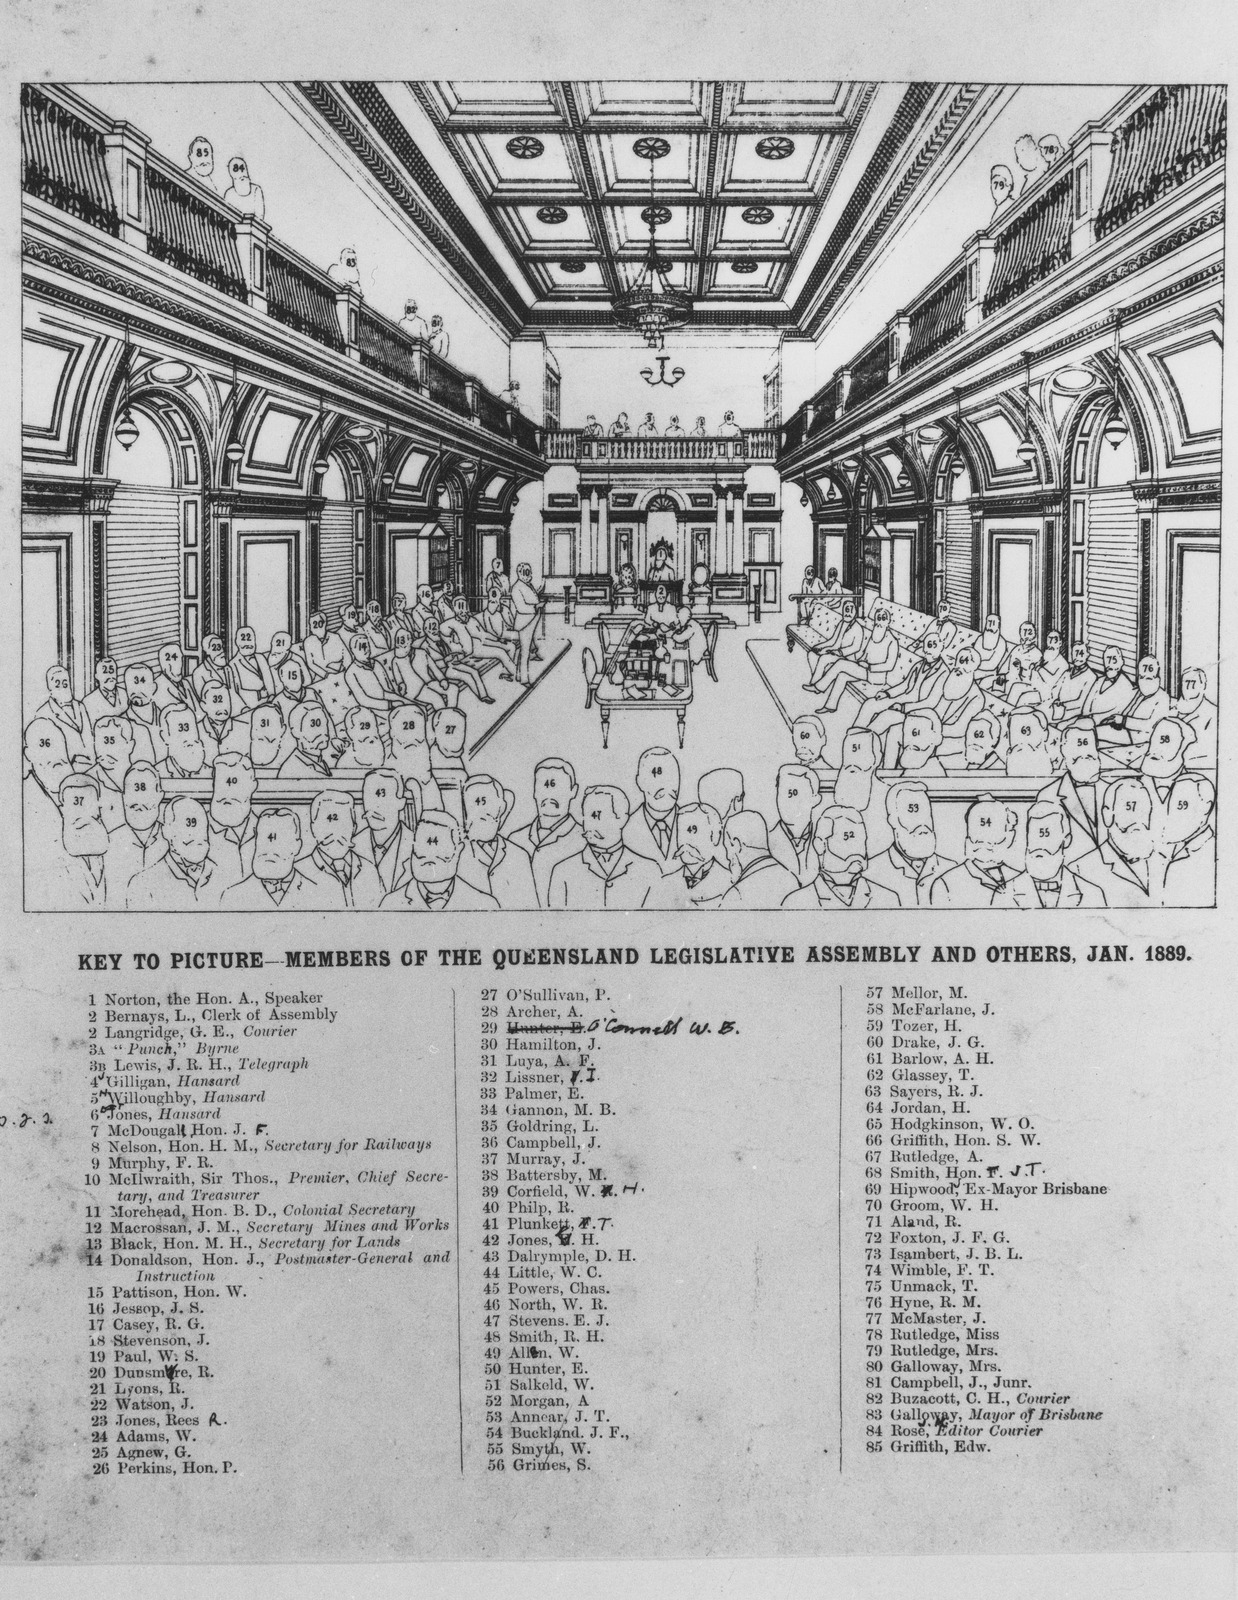 Sketch of members of the Queensland Legislative Assembly in the Parliament.